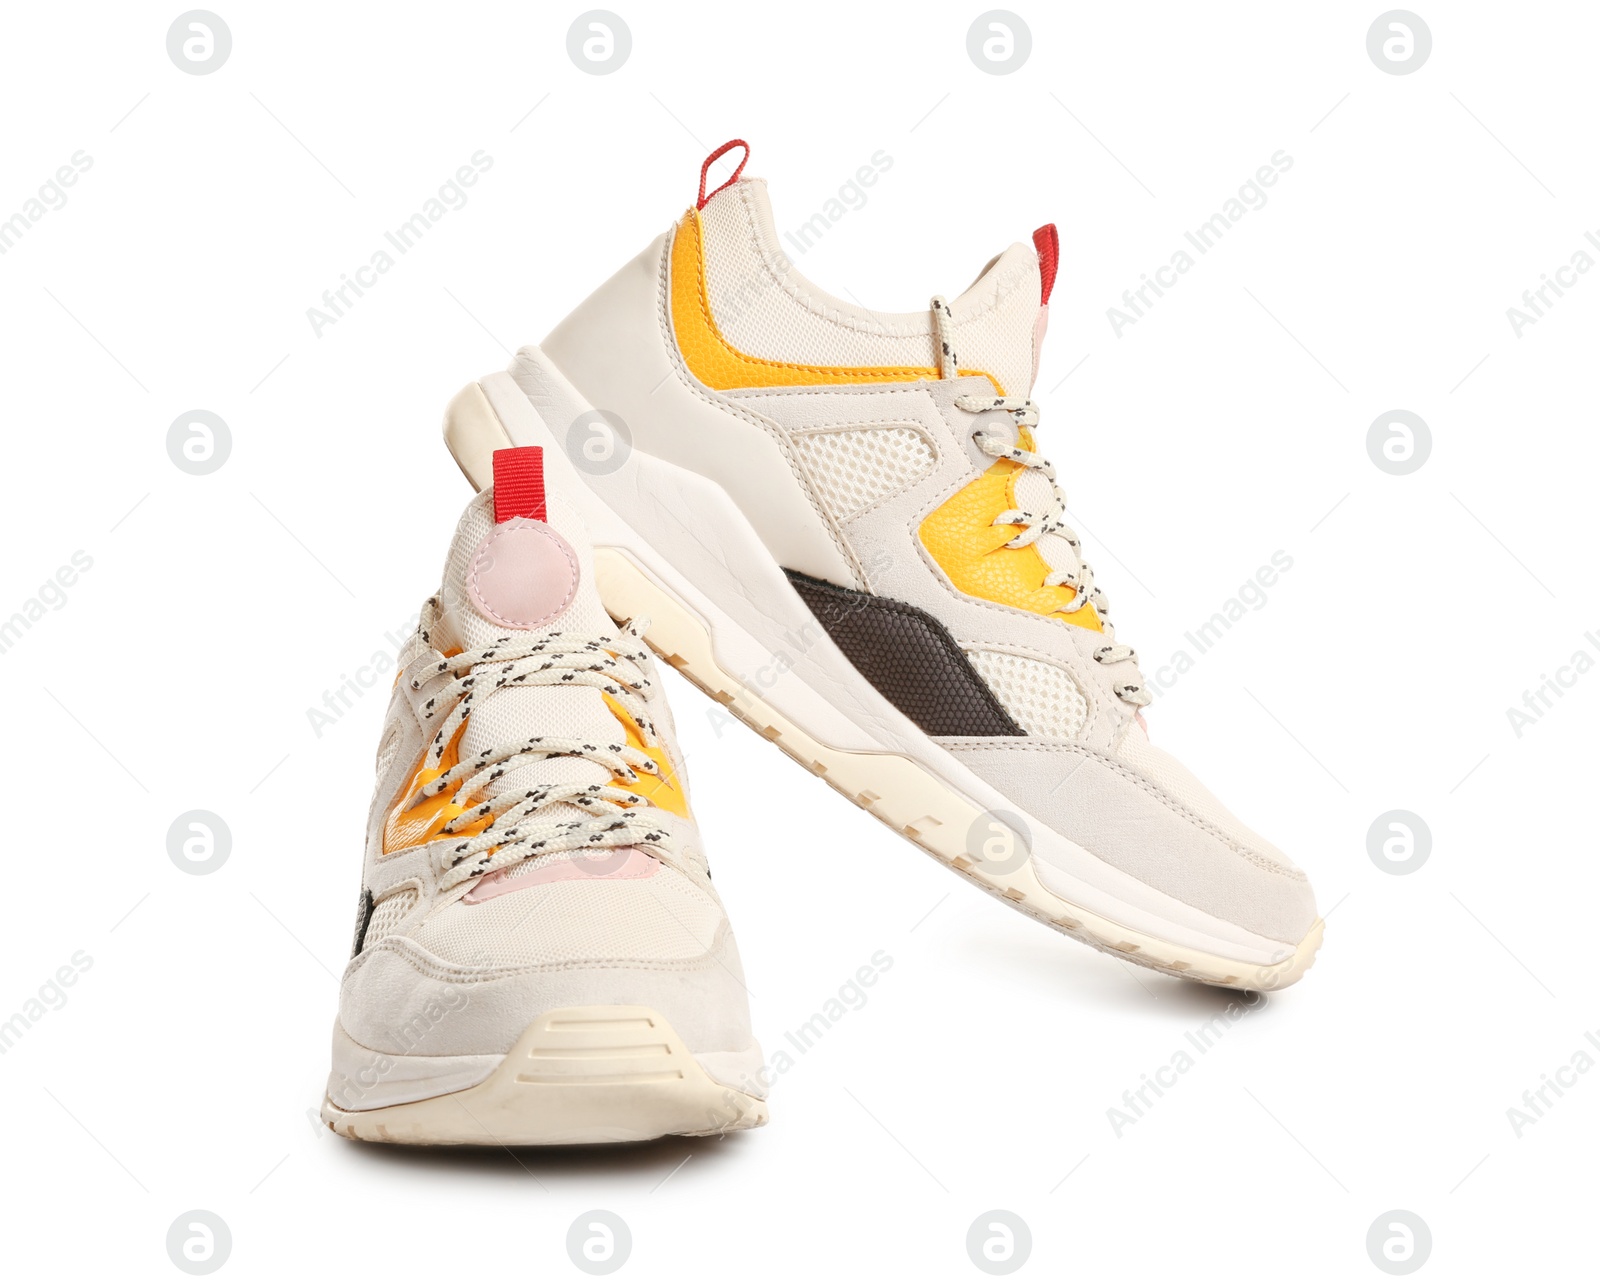 Photo of Pair of sports shoes on white background